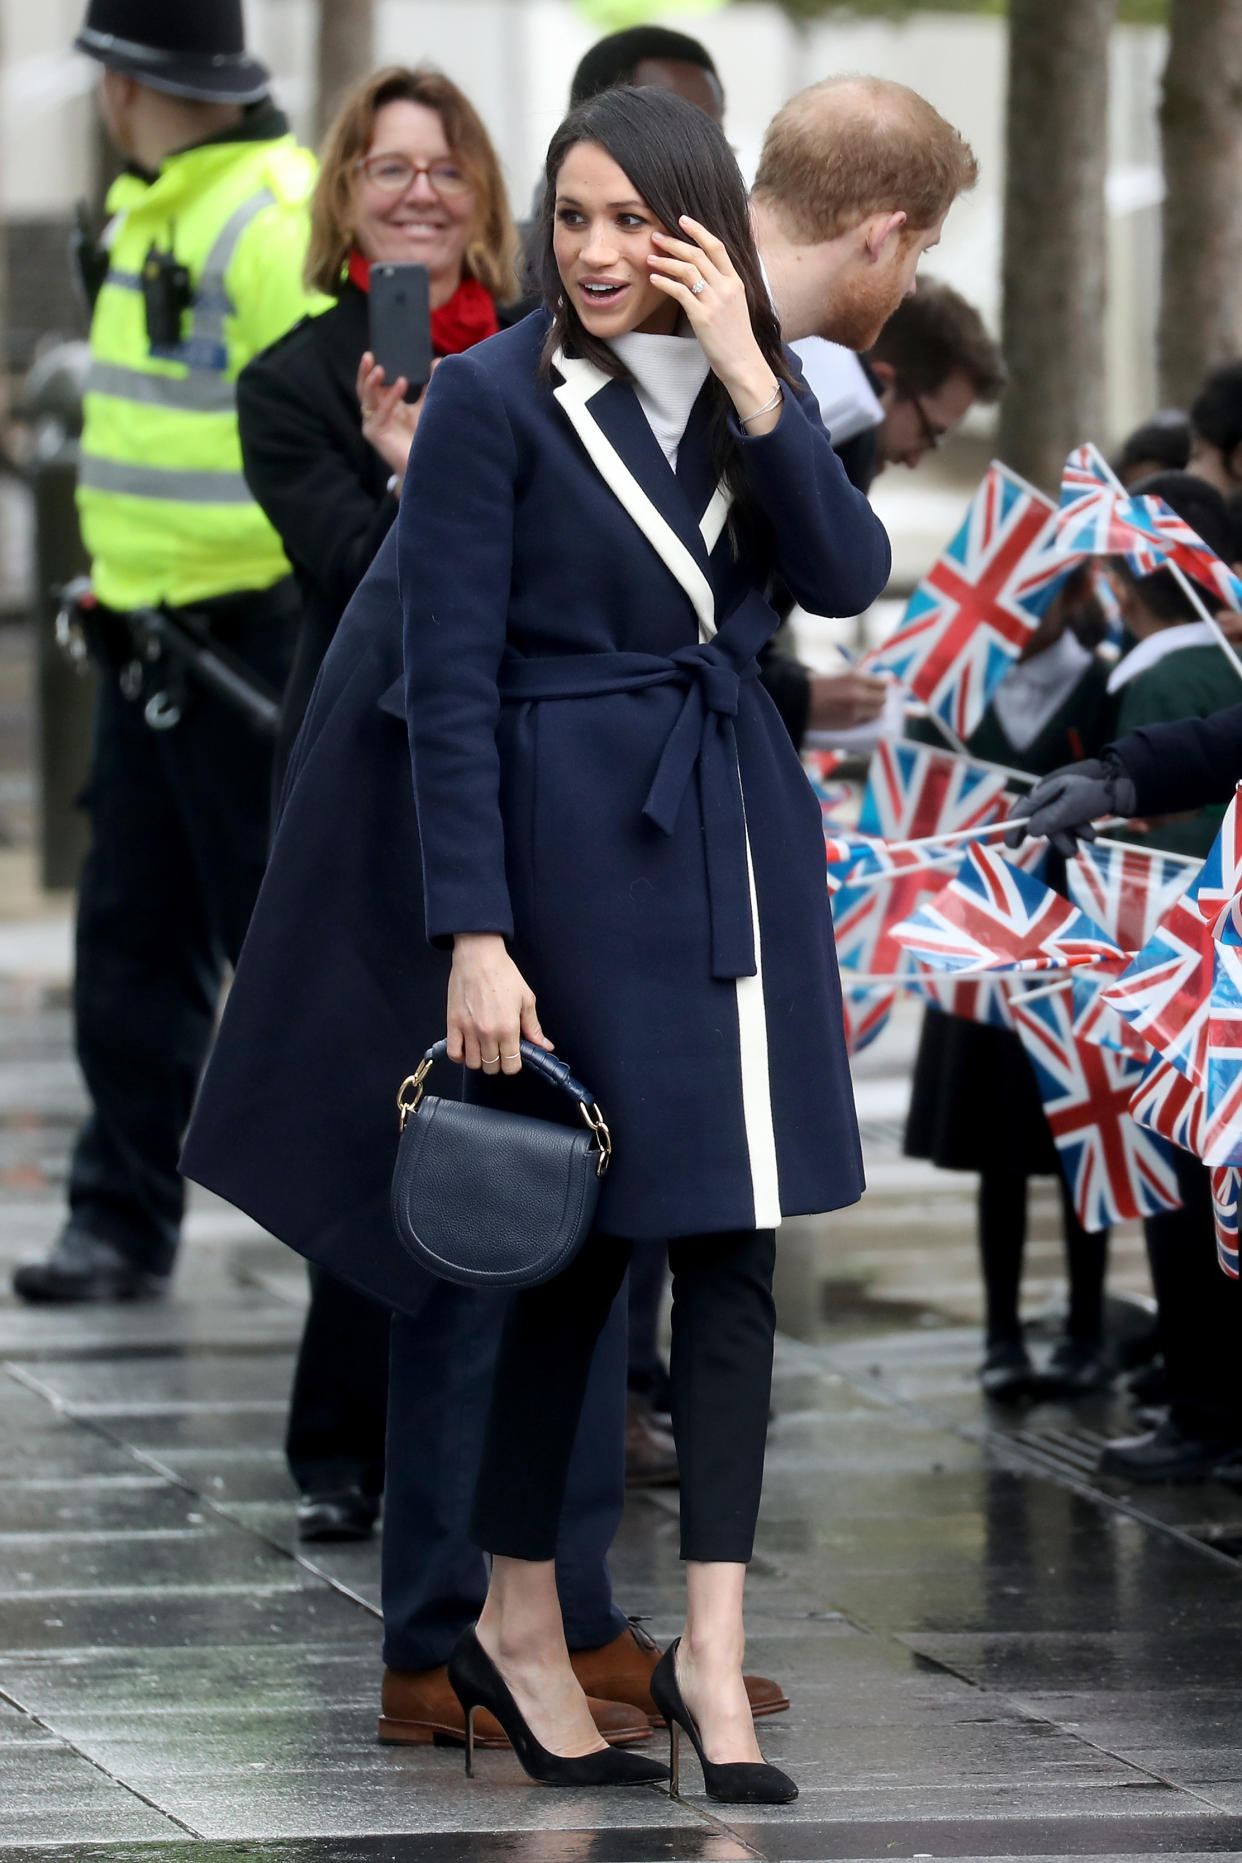 Markle visited Birmingham, England, in a J.Crew coat. (Photo: Chris Jackson/Getty Images)